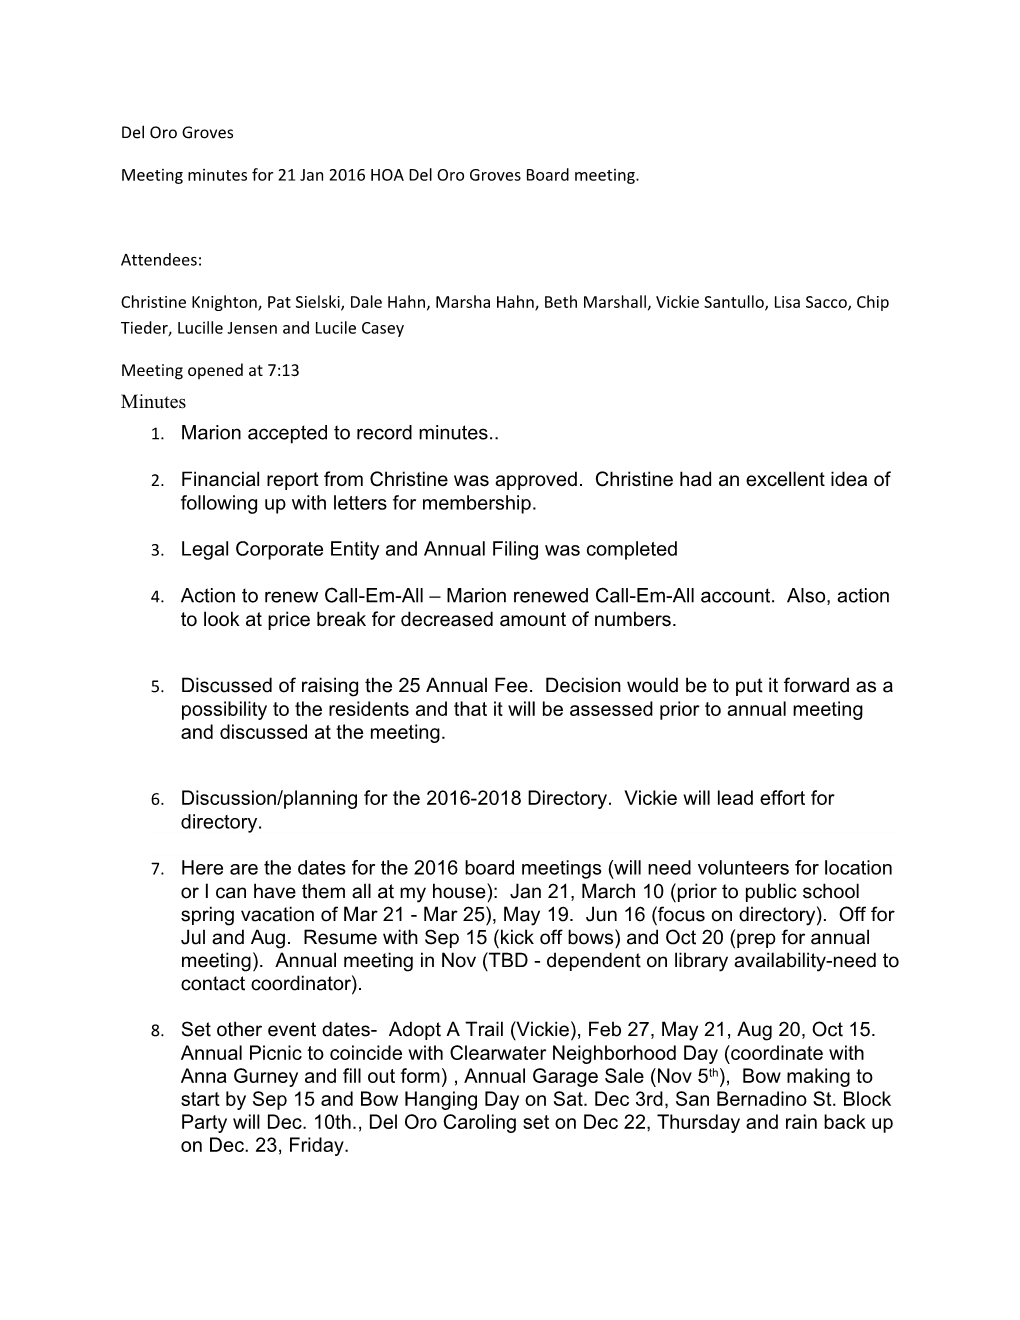 Meeting Minutes for 21 Jan 2016 HOA Del Oro Groves Board Meeting